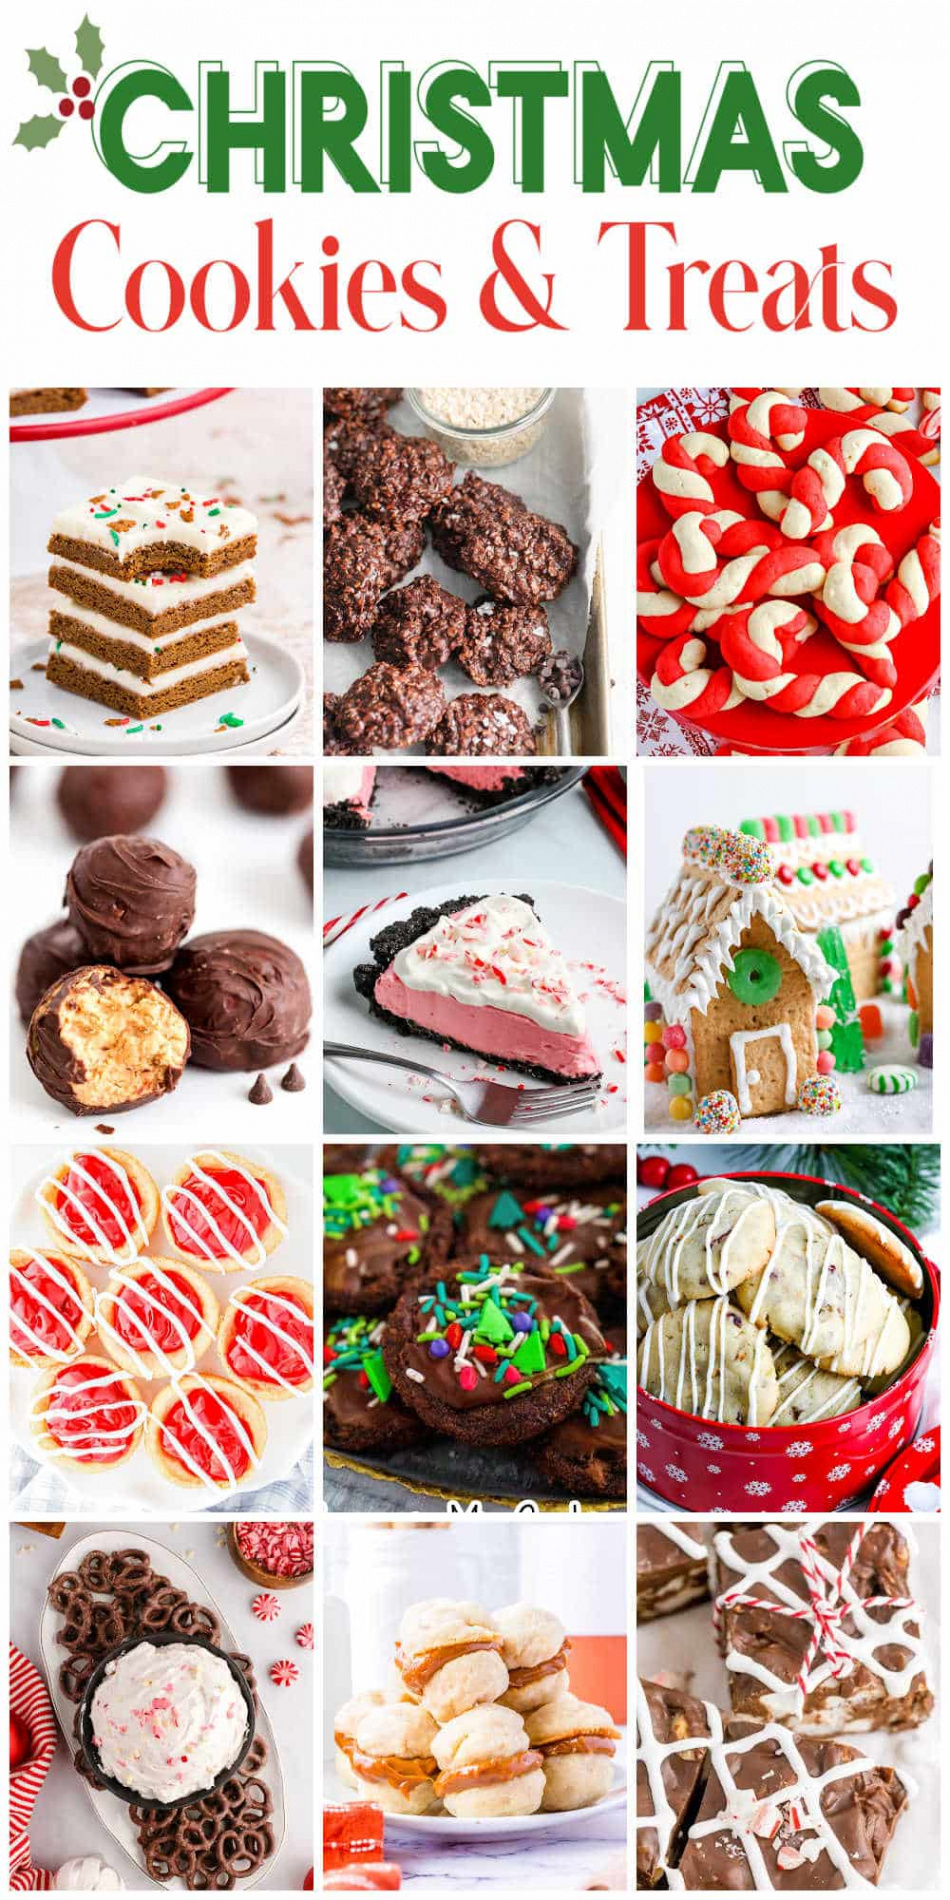 Best Christmas Cookies and Treats for